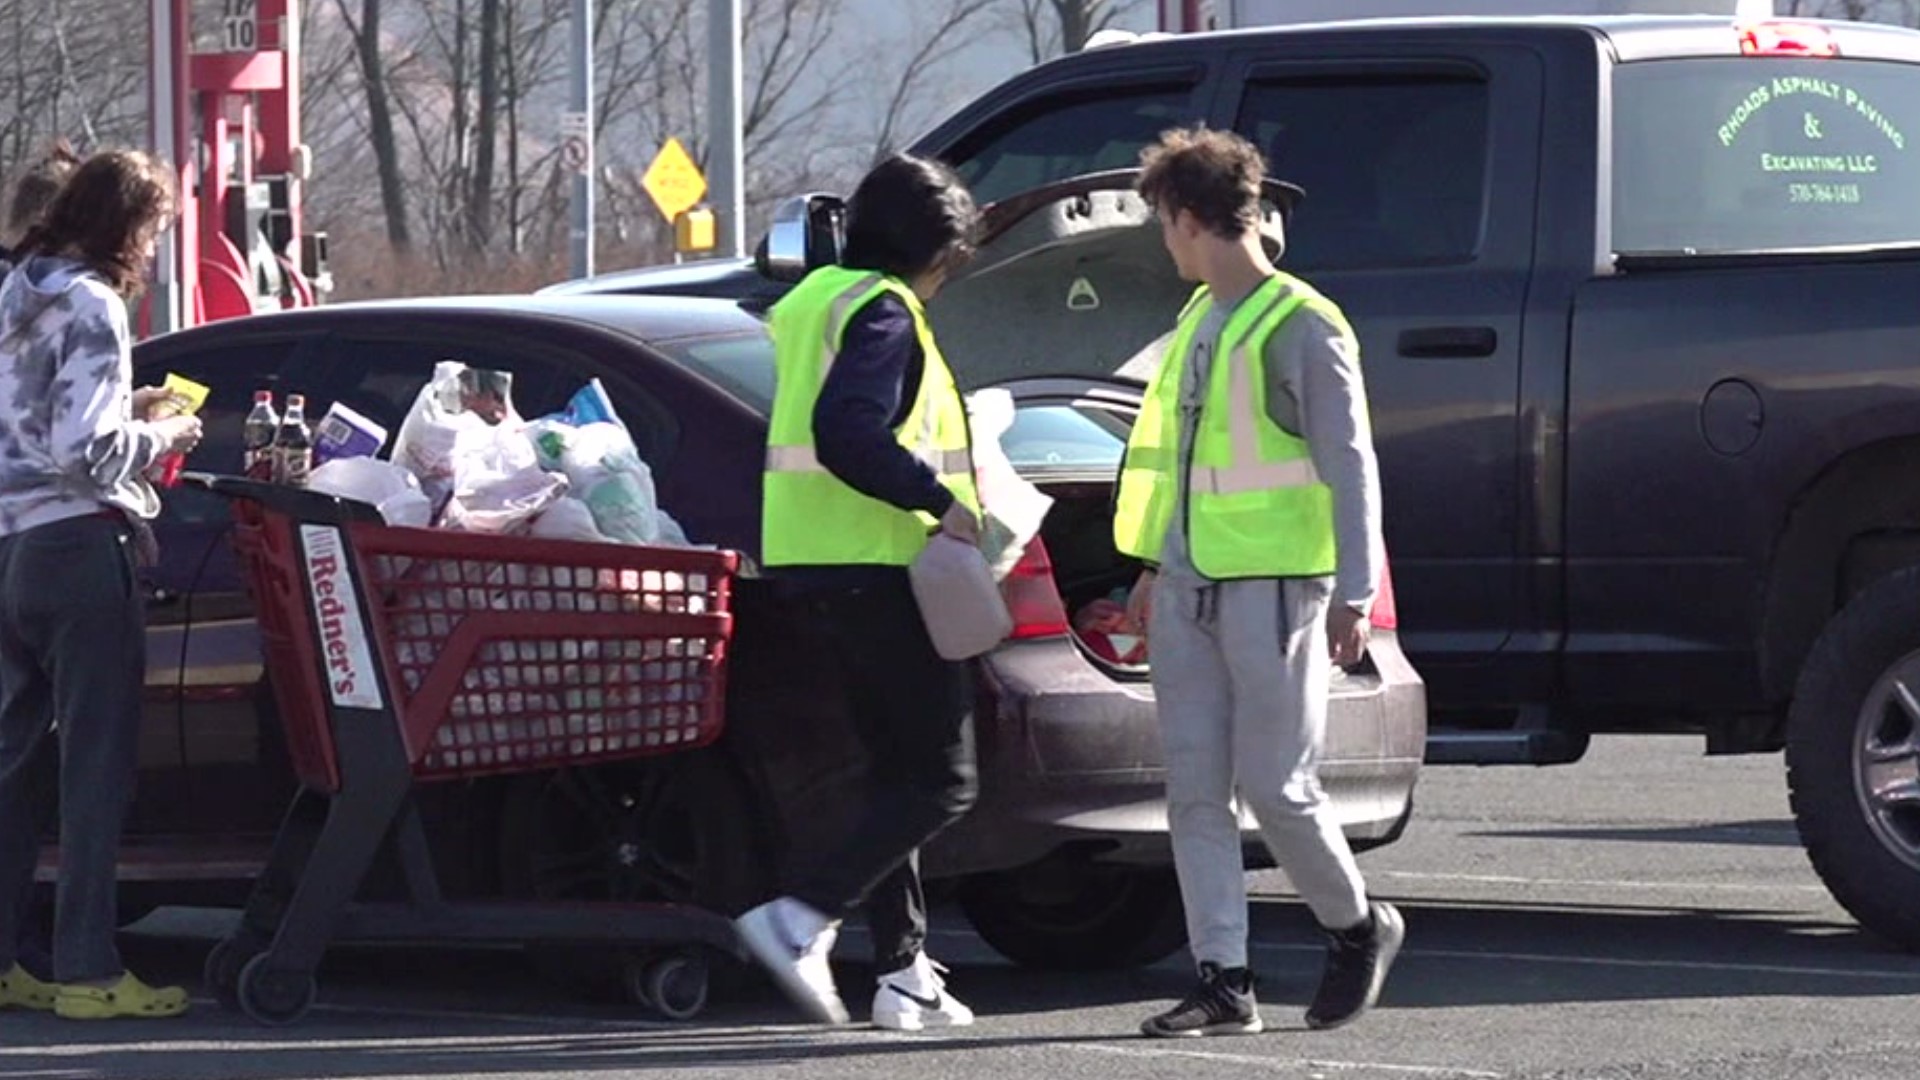 Students at the Schuylkill Technology Center spent their last day before Thanksgiving break lending a helping hand at grocery stores in the county.